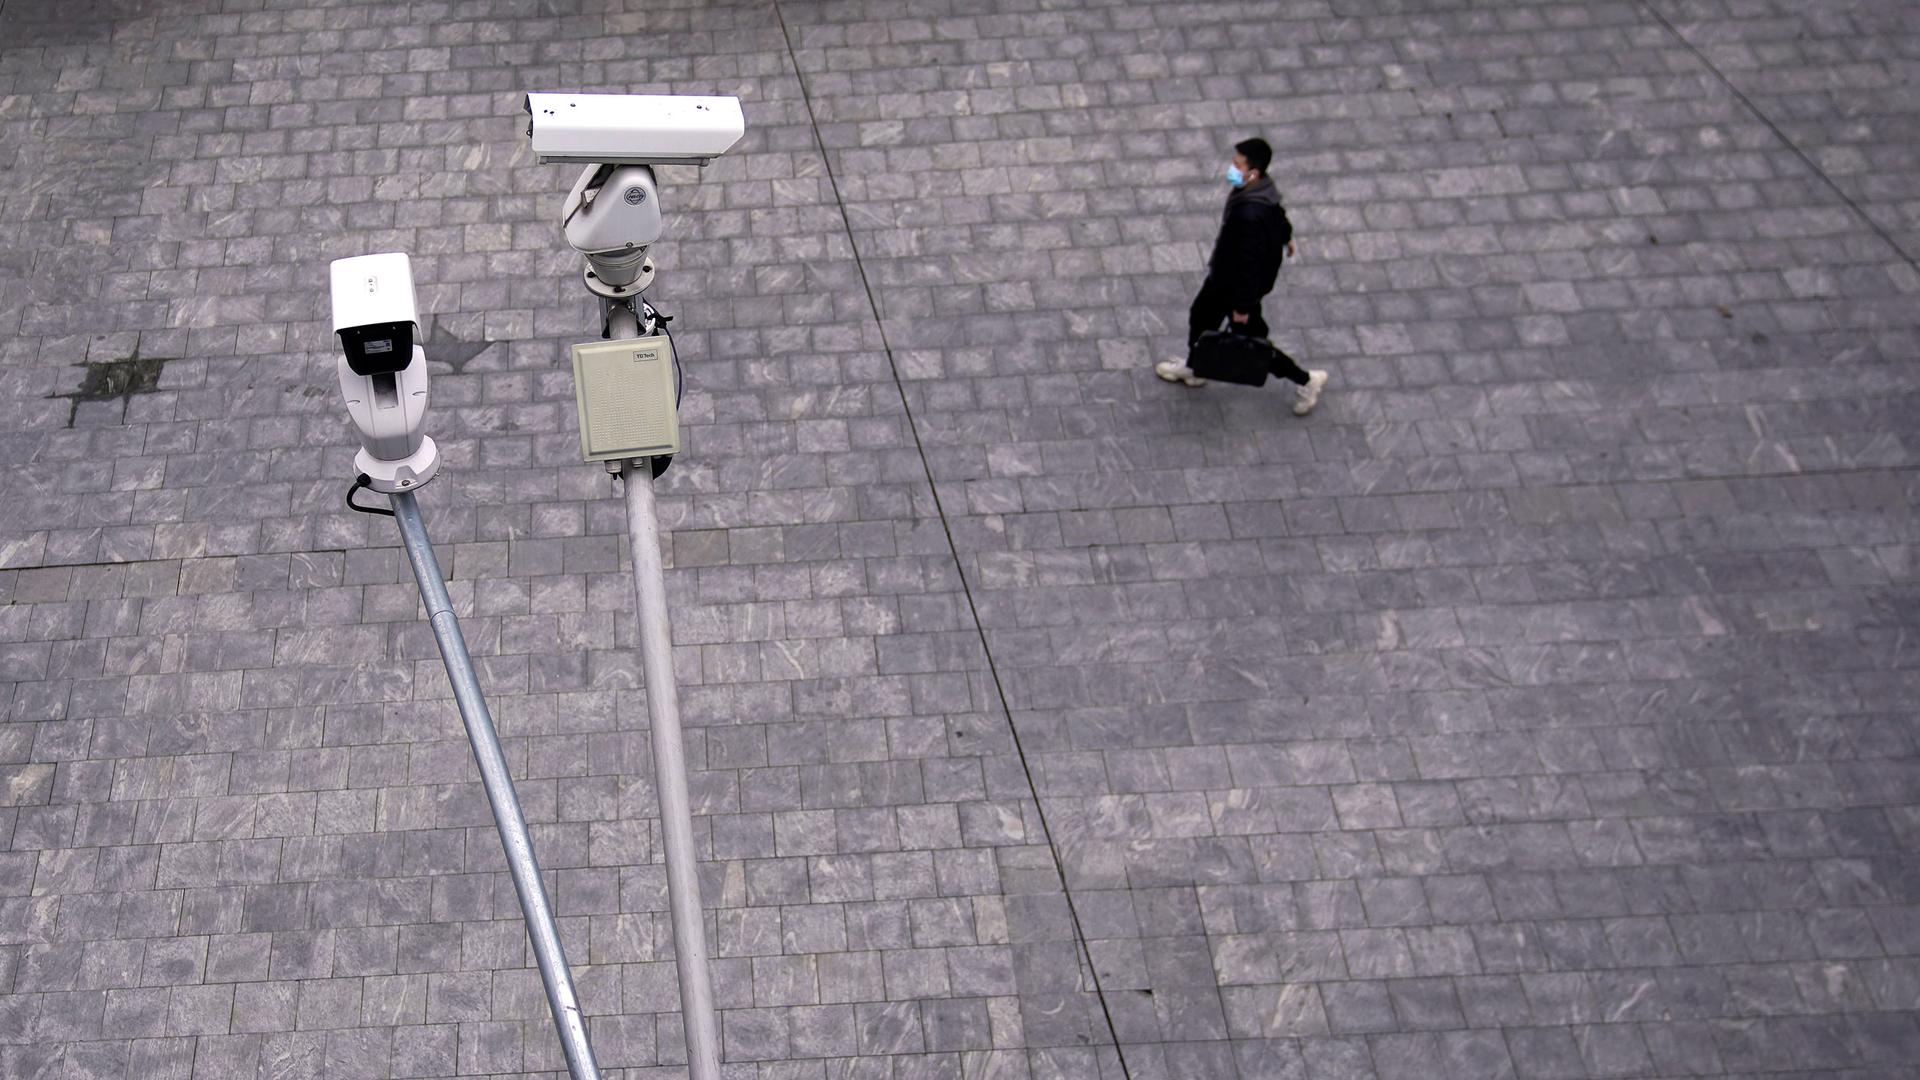 Two surveillance cameras are shown in the nearground with a man walking in a stone walkway and wearing a protective face mask in the distance.